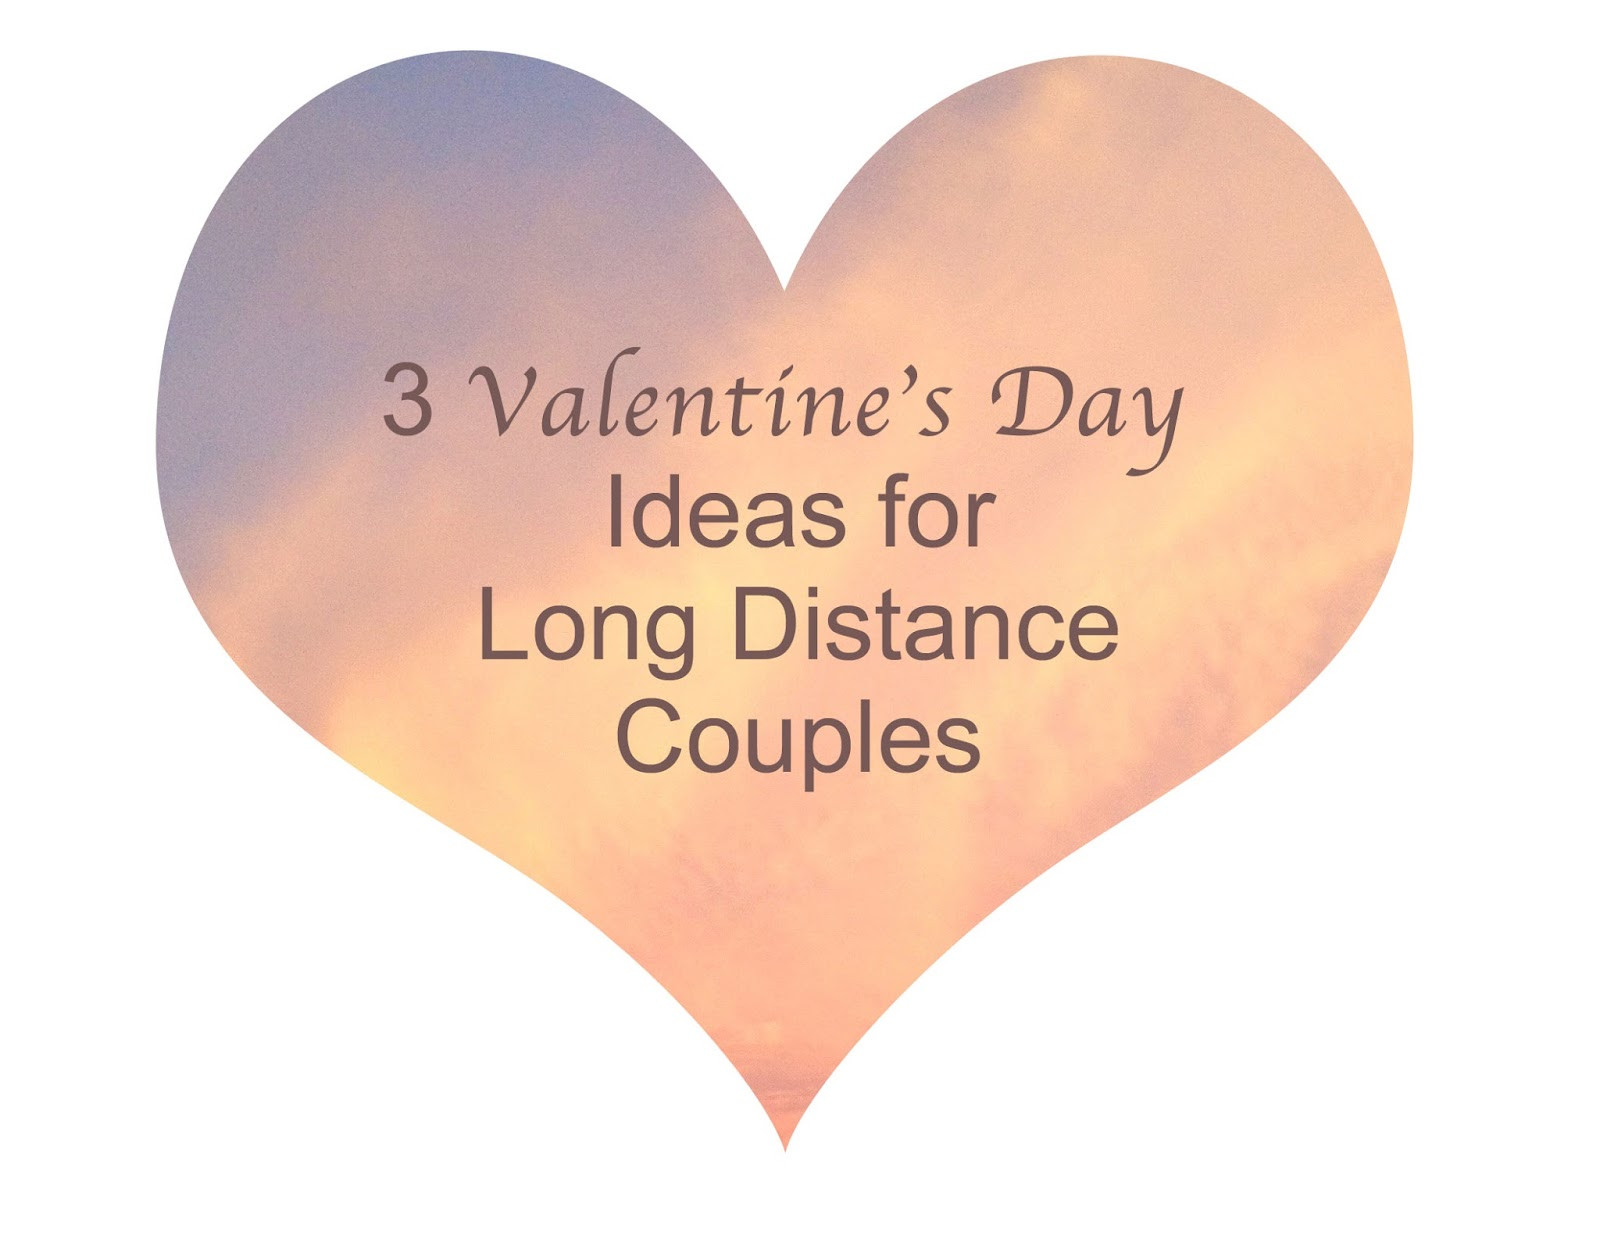 Long Distance Valentines Day Ideas
 Meet Me In Midtown 3 Valentine s Day Ideas for Long